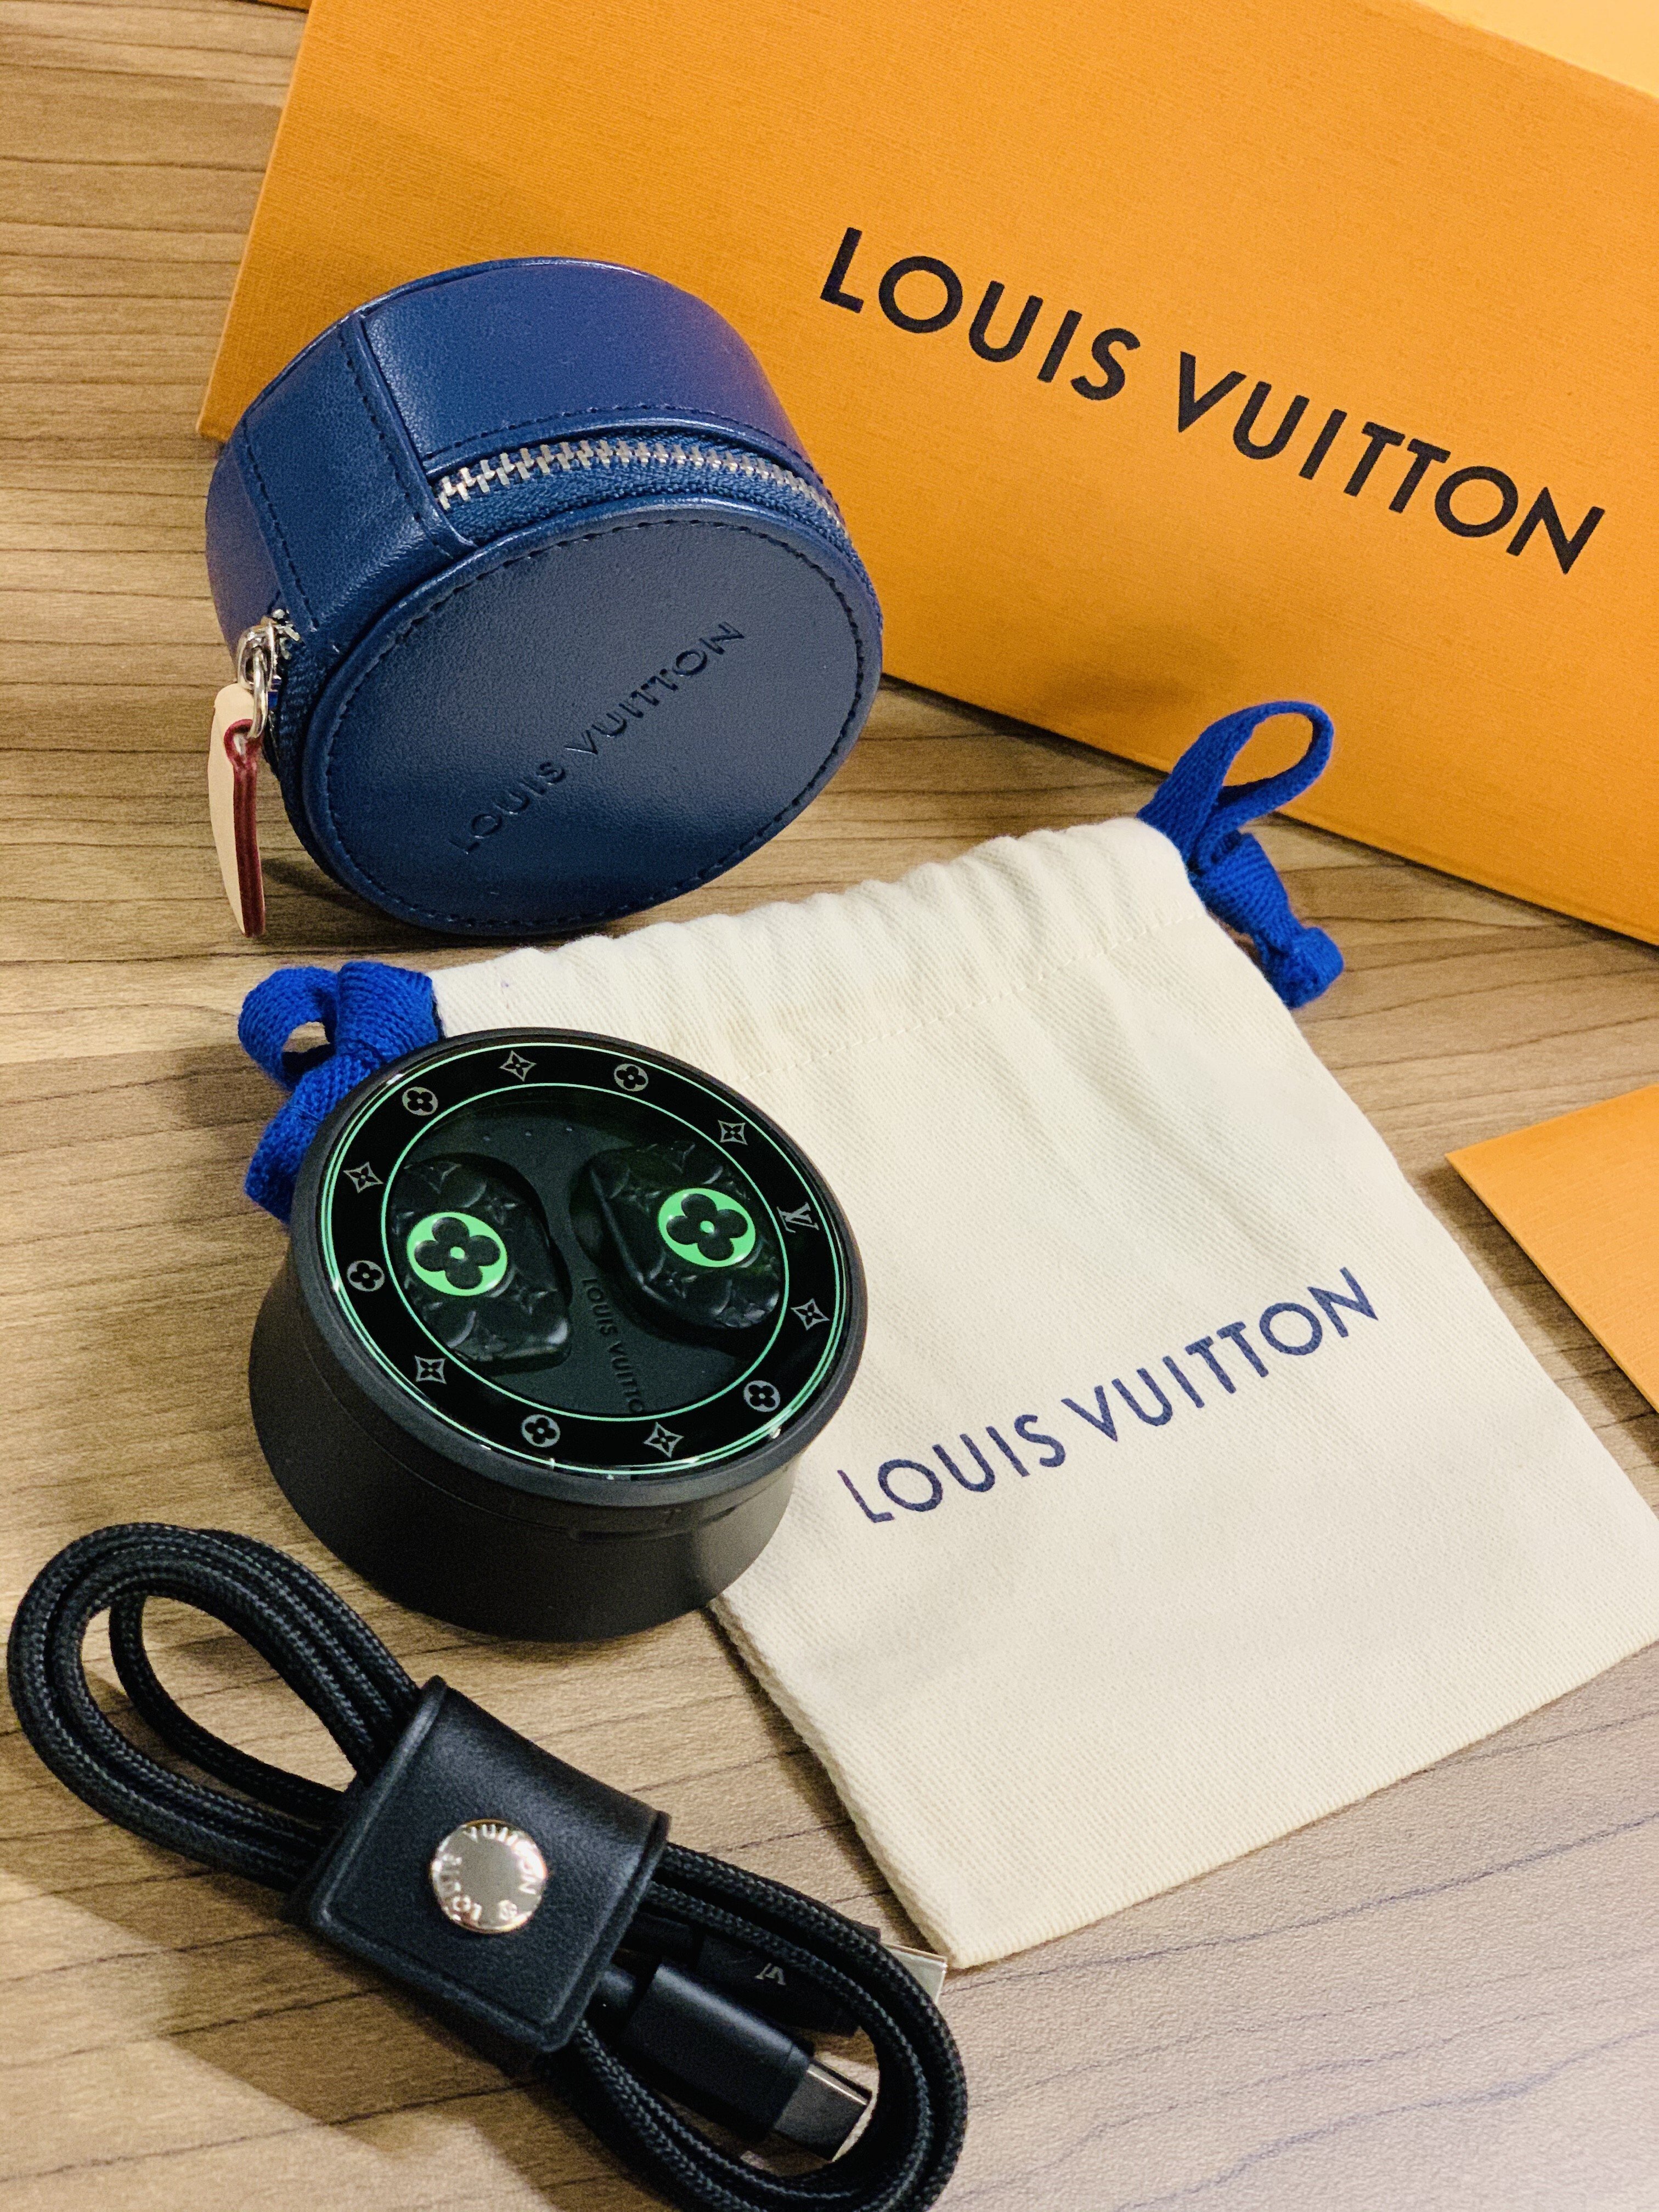 The Louis Vuitton Horizon 2.0 earbuds in their latest livery. Photo: Chow Kwok-wang